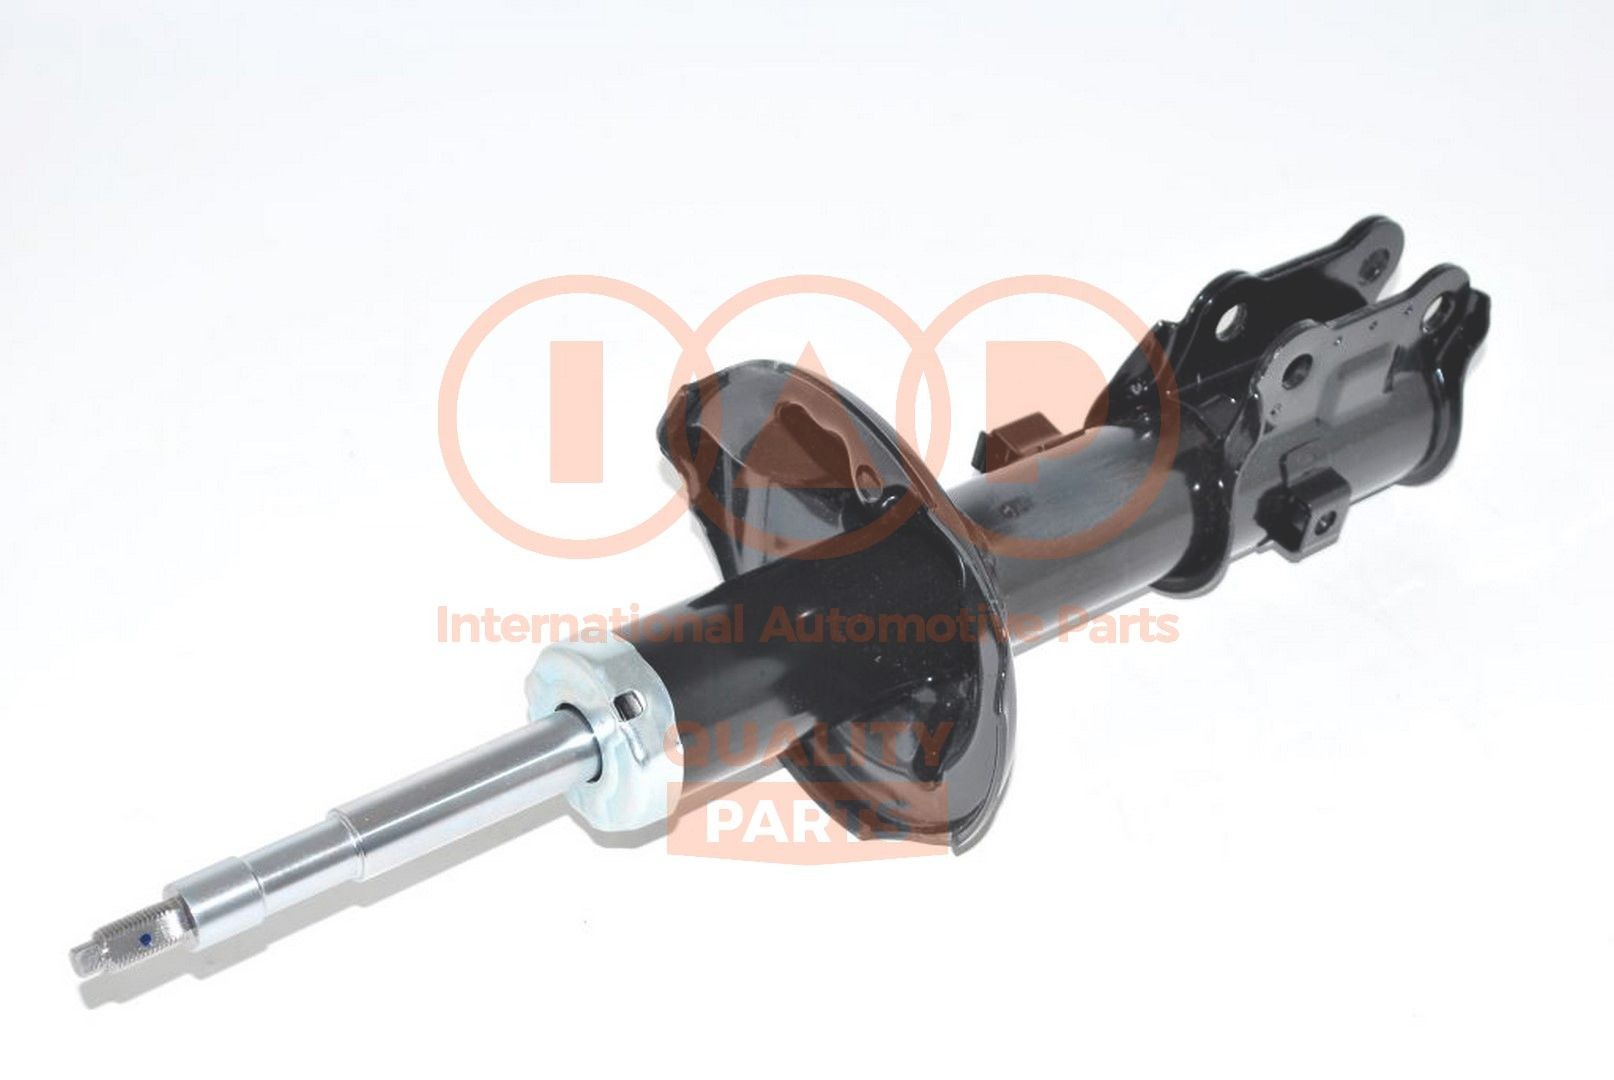 IAP QUALITY PARTS 504-07096 Shock absorber 54650-02220